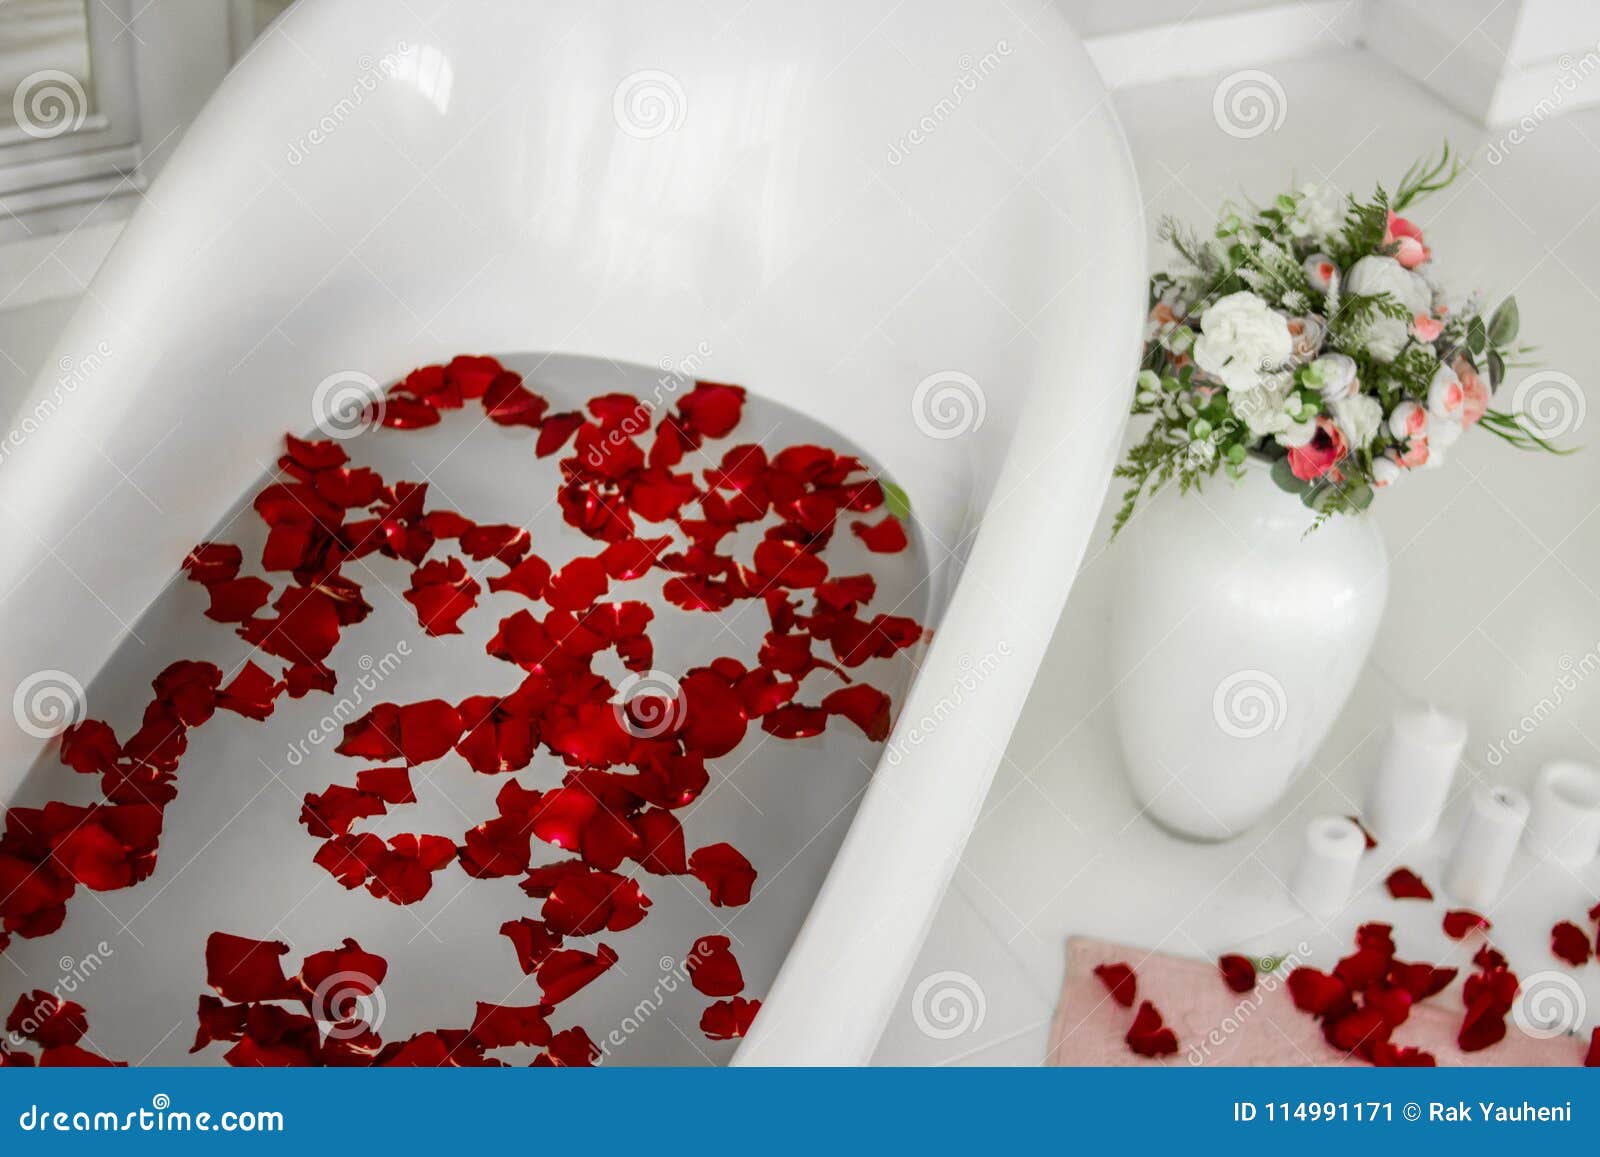 White Bath with Rose Petals. Taking a Bath with Roses. Stock Image - Image  of clean, bathroom: 114991171